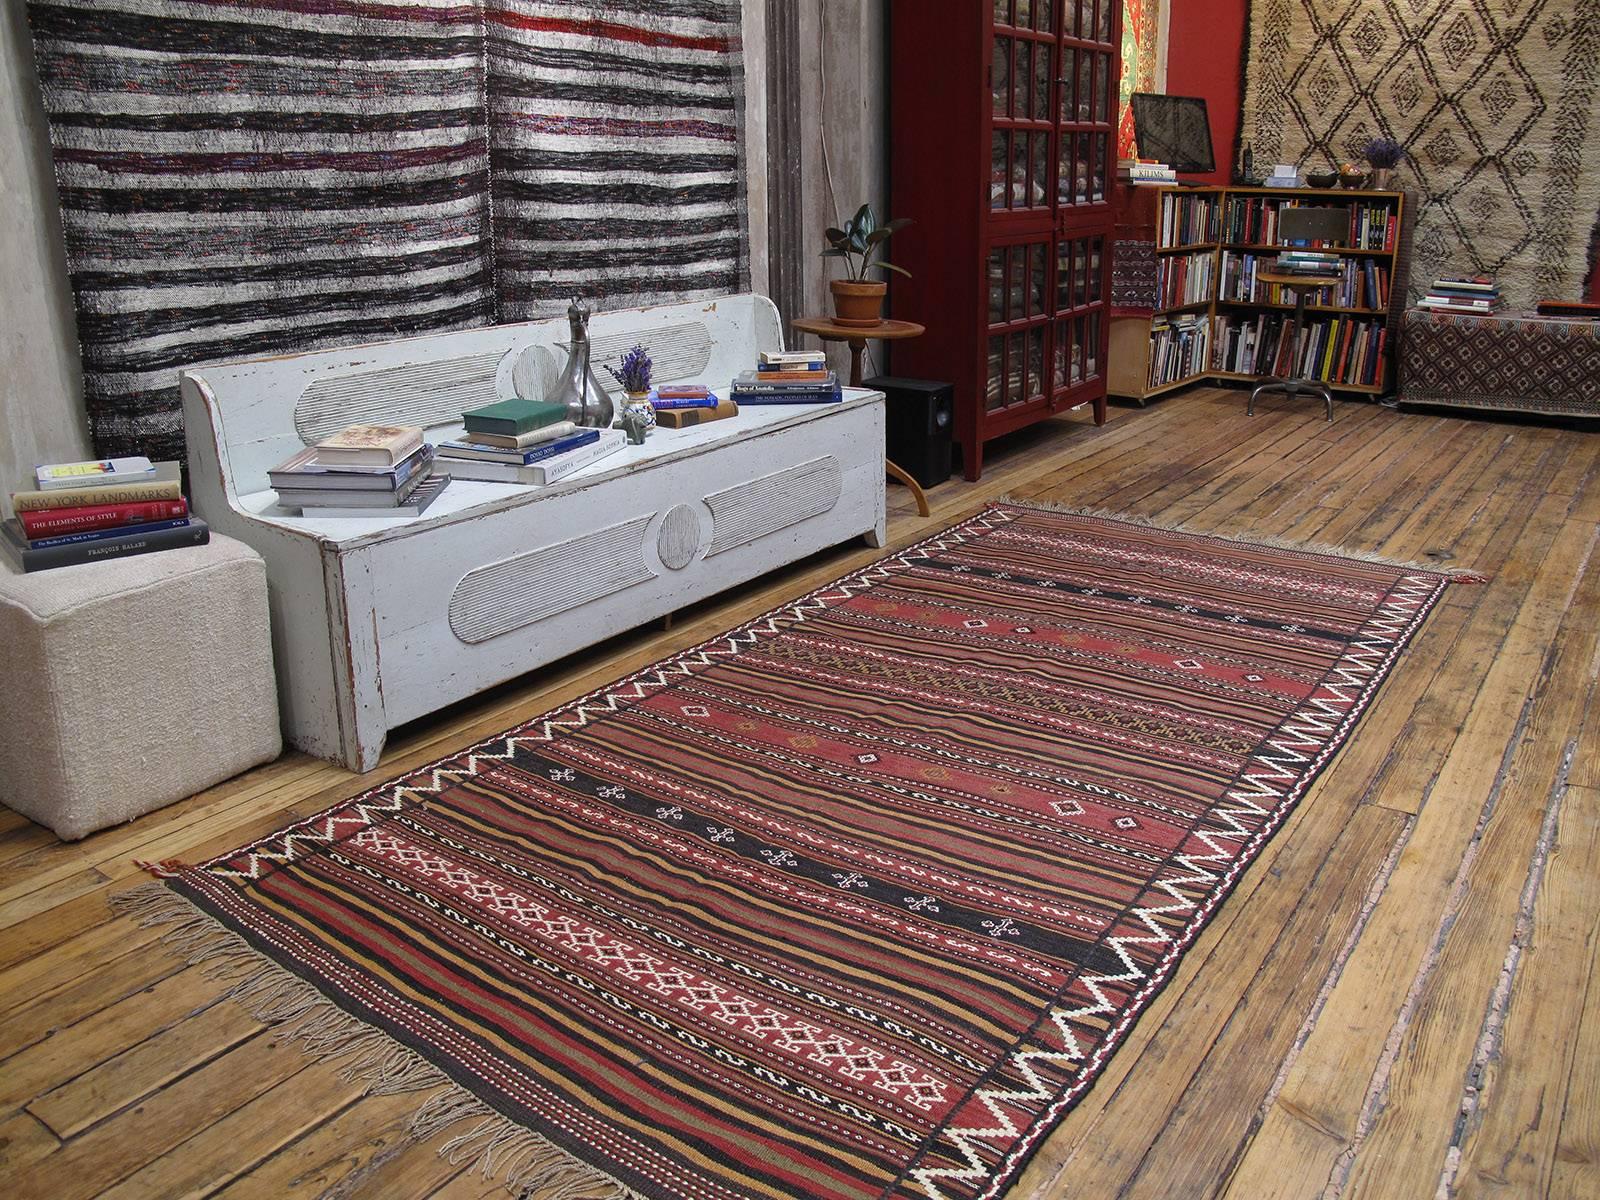 A tribal kilim by the Baluch weavers in their traditional design, color palette and technique: bands decorated in various brocading techniques alternating with plain multi-colored stripes, with a striking zigzag border in white wool. Very well